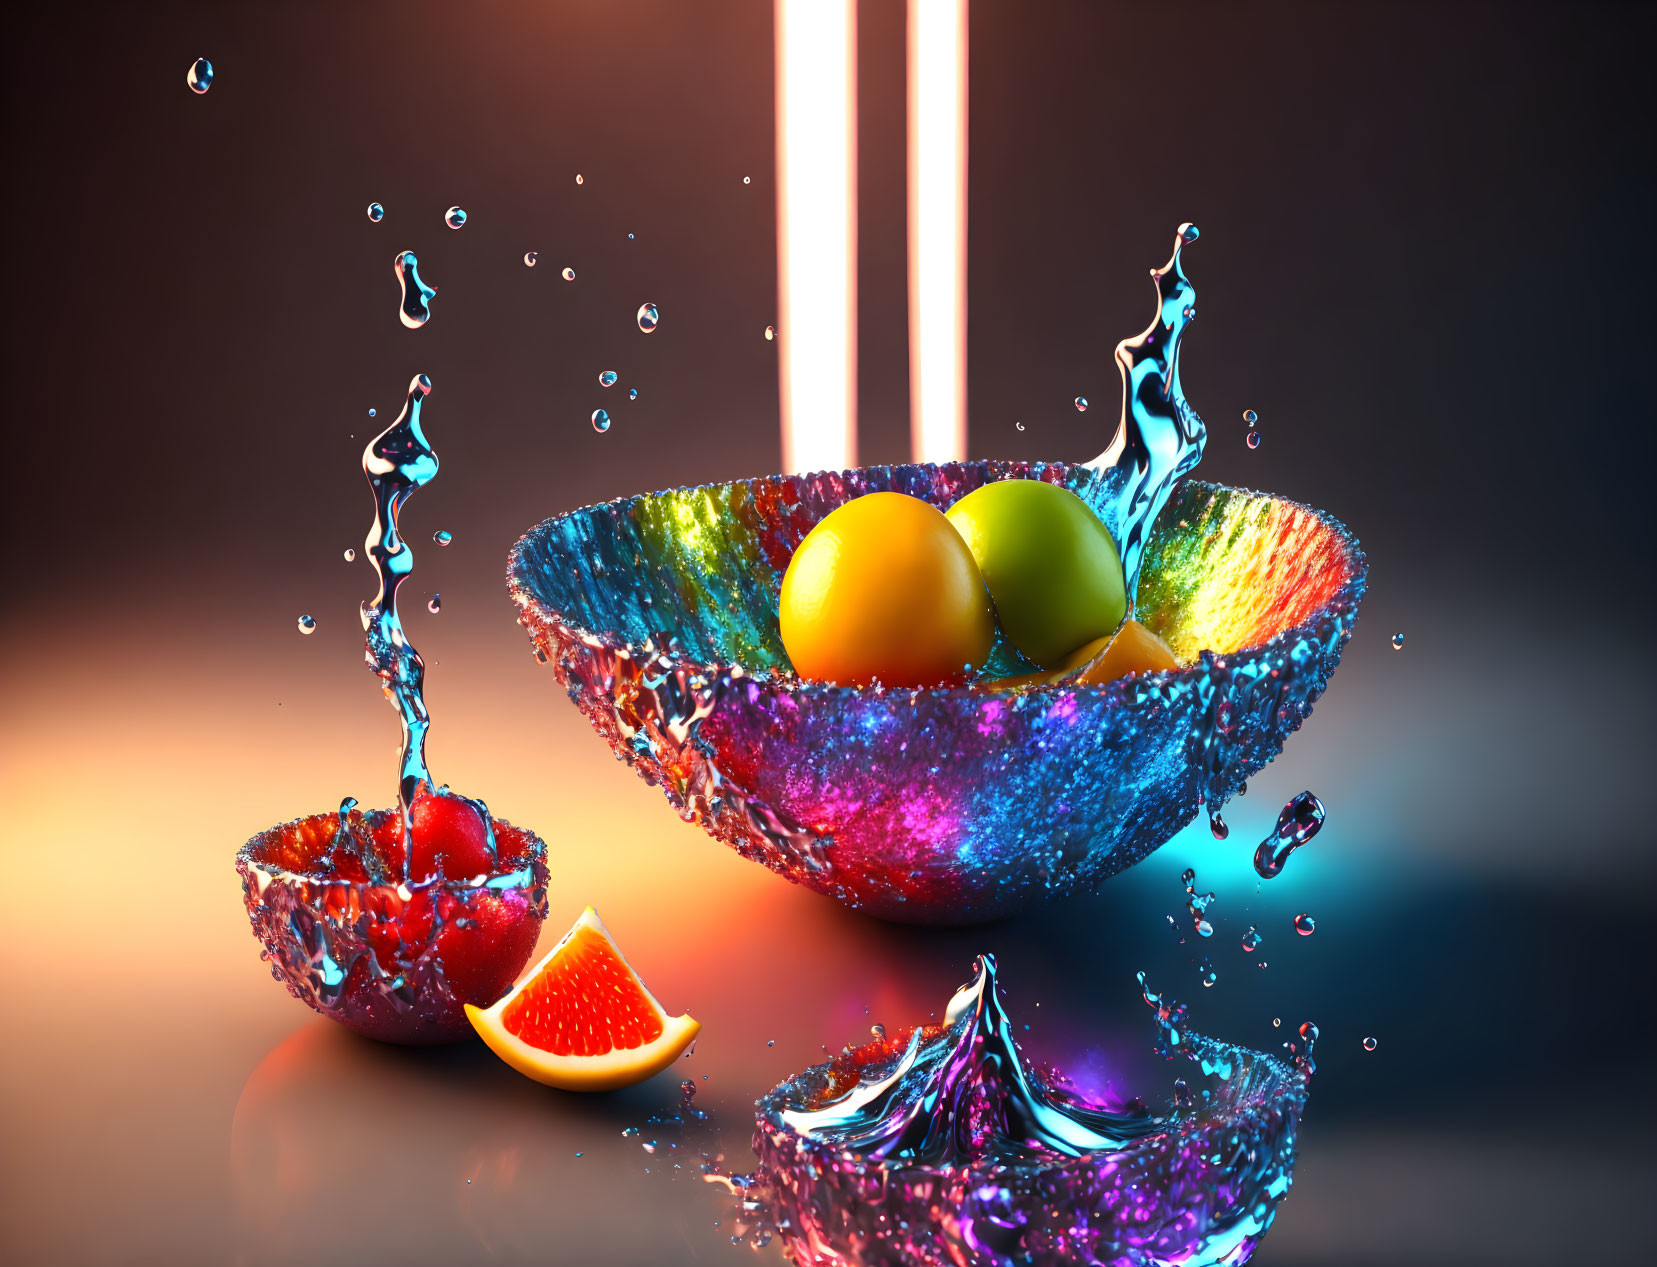 Vibrant fruit bowls with splashing water and oranges under light